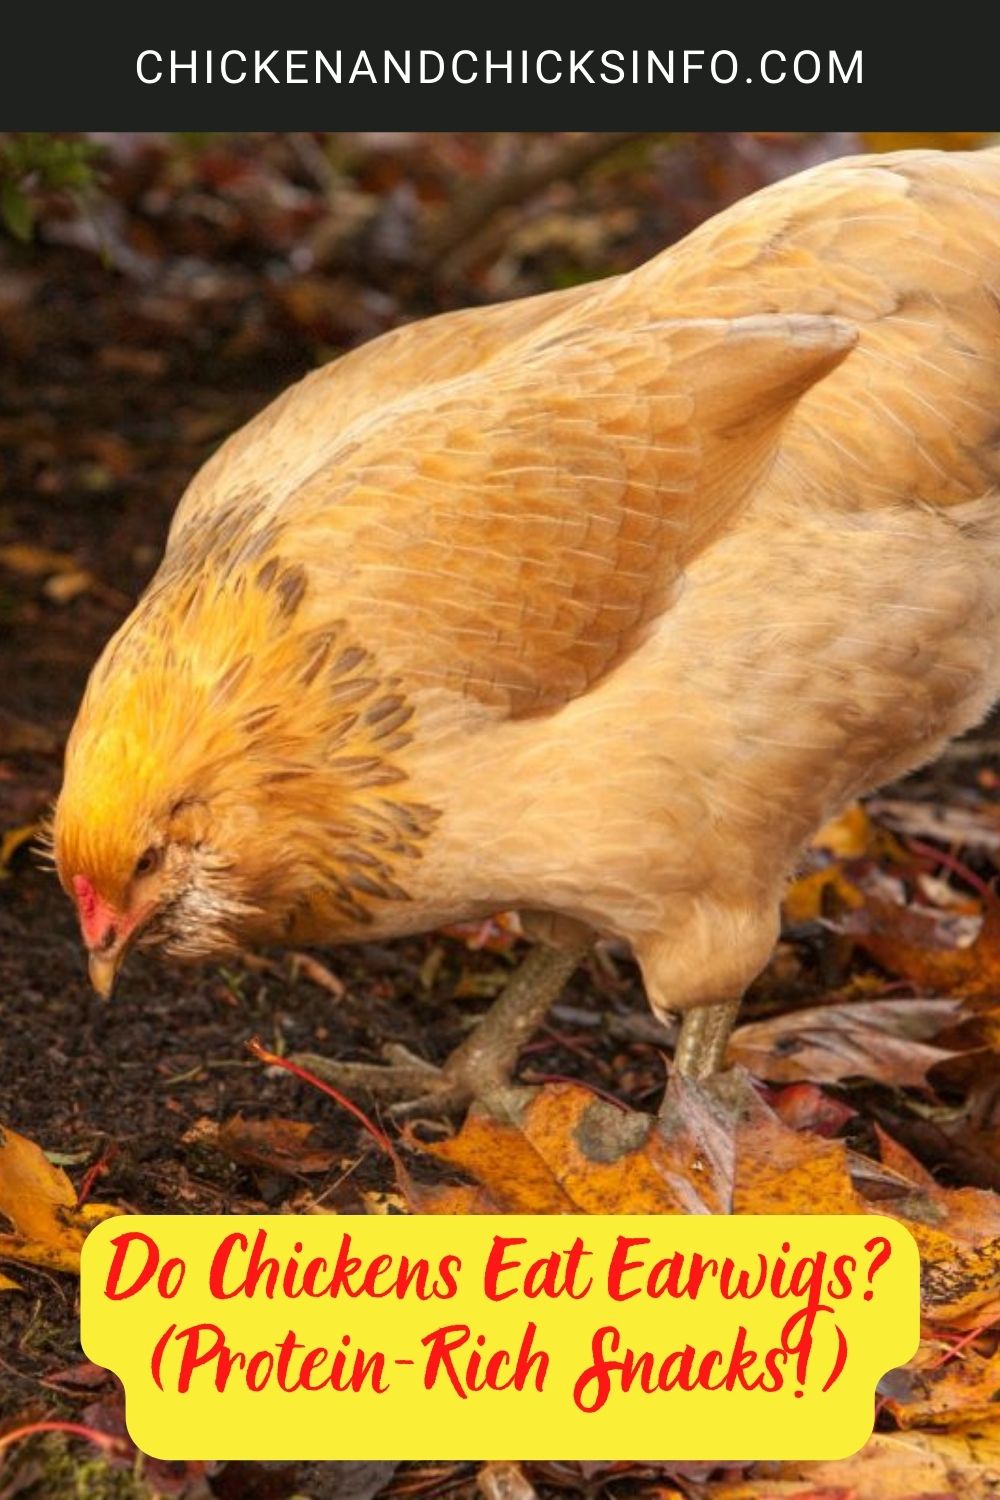 Do Chickens Eat Earwigs? (Protein-Rich Snacks!) poster.